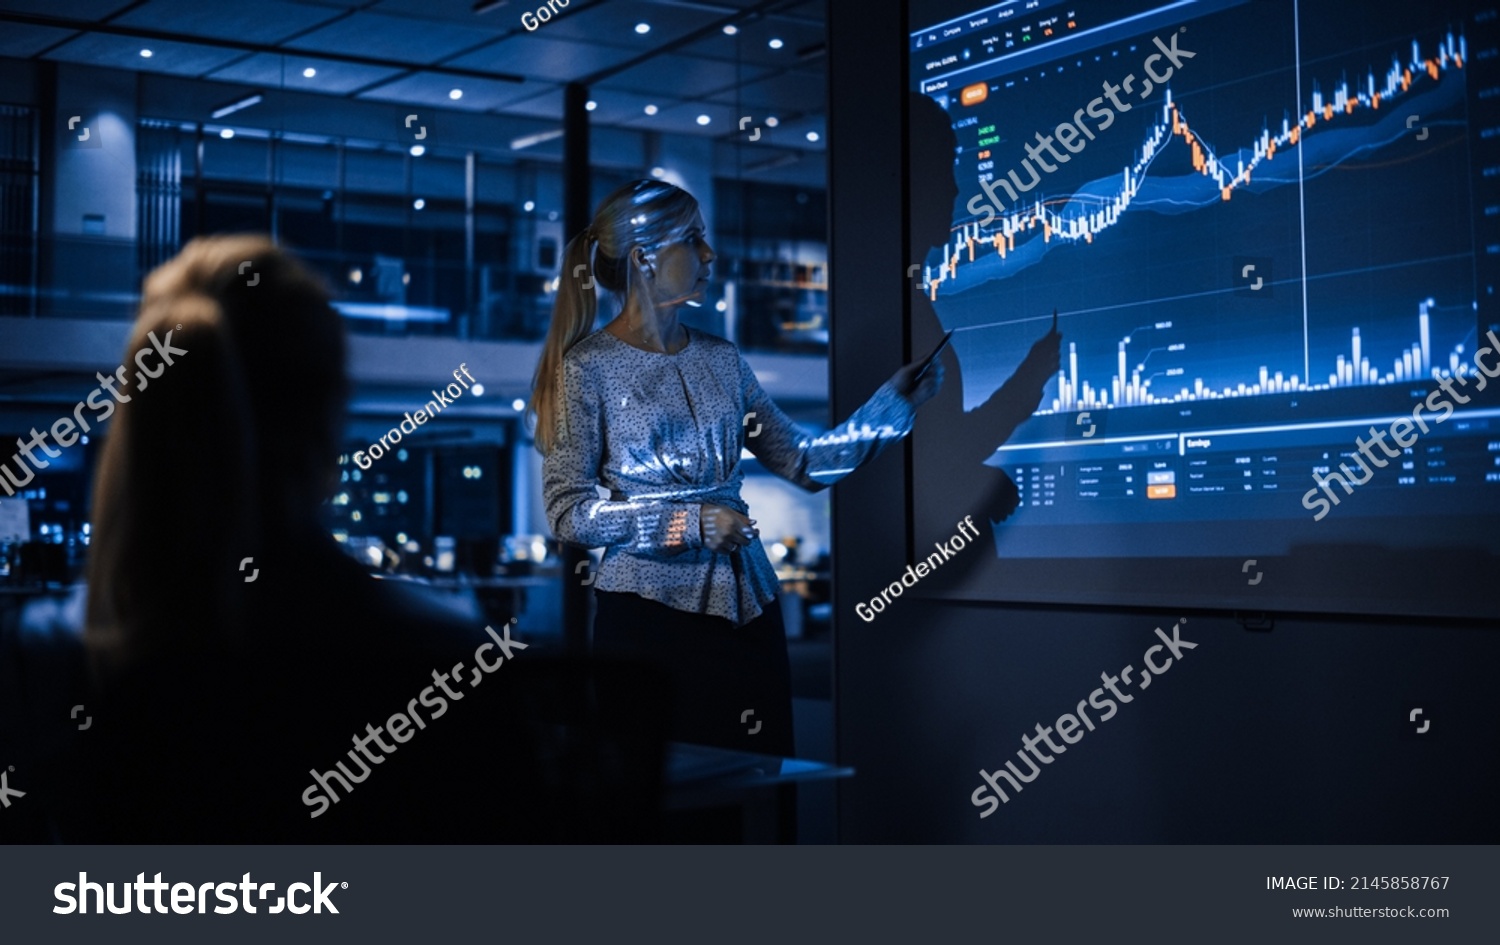 Business Conference Meeting Presentation: Businesswoman does Financial Analysis talks to Group of Businessspeople. Projector Screen Shows Stock Market Data, Investment Strategy, Revenue Growth #2145858767